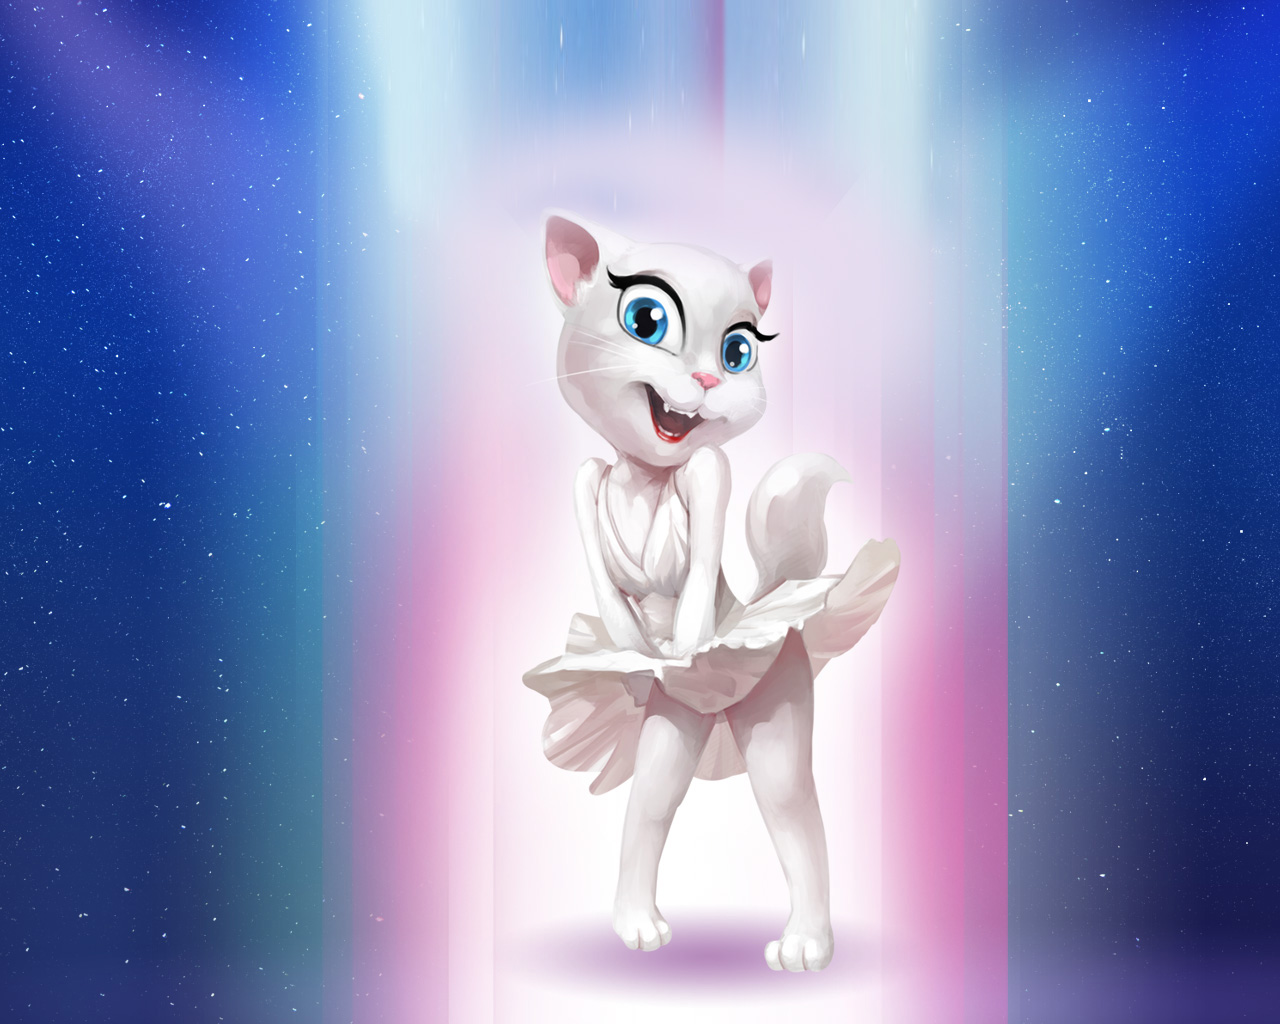 My Talking Angela Hack Coins and Diamonds 2021 [[Working Link]]